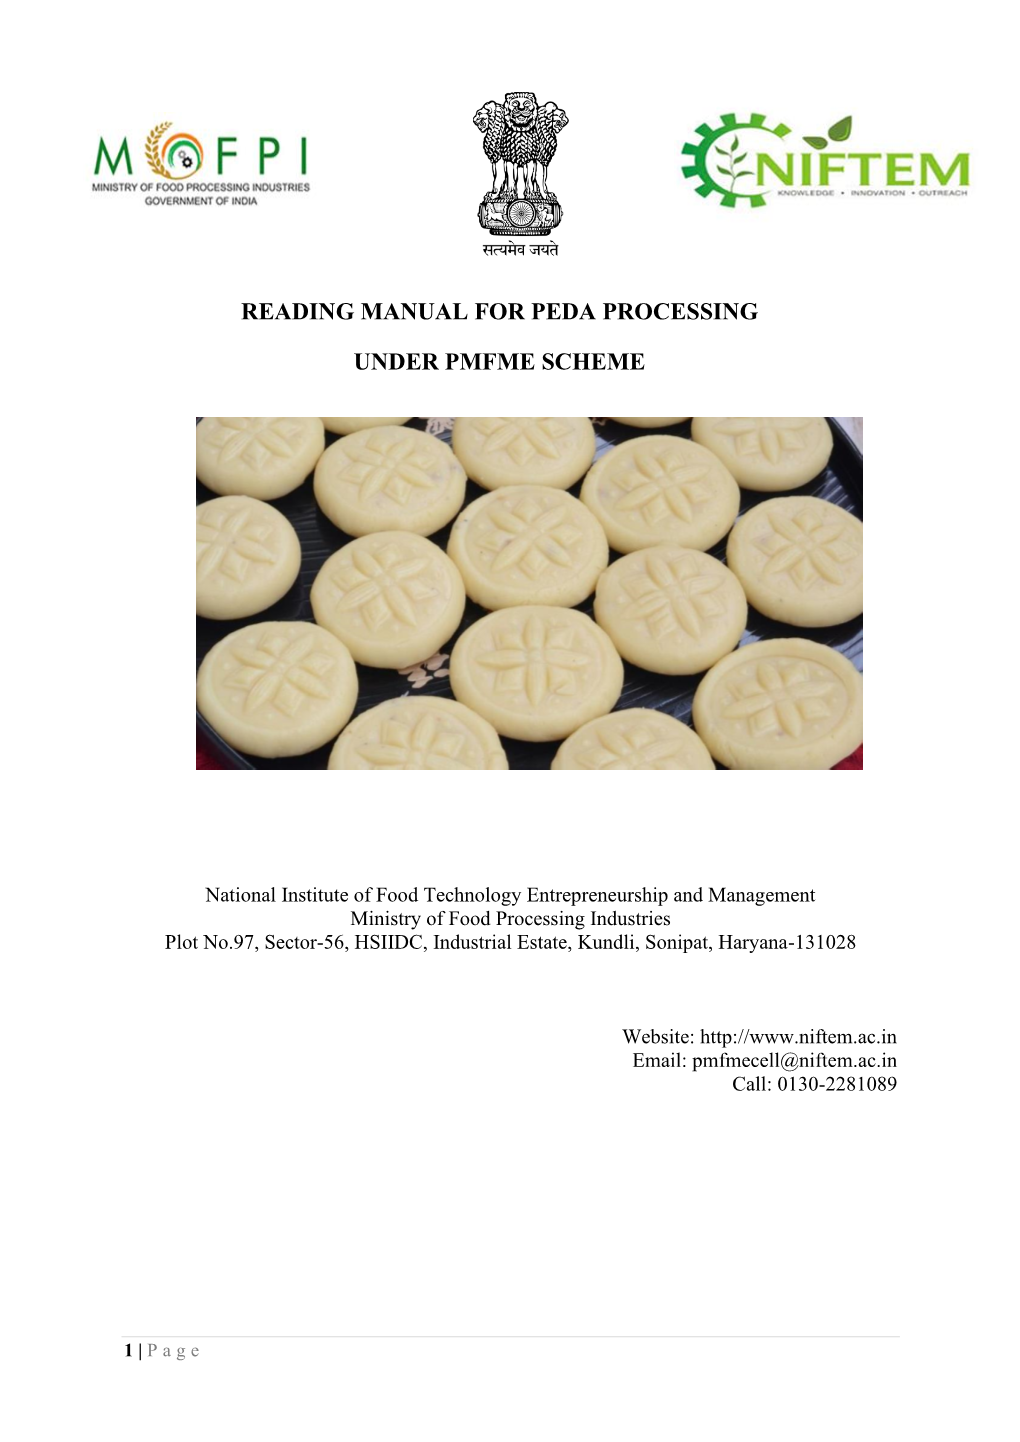 Reading Manual for Peda Processing Under Pmfme